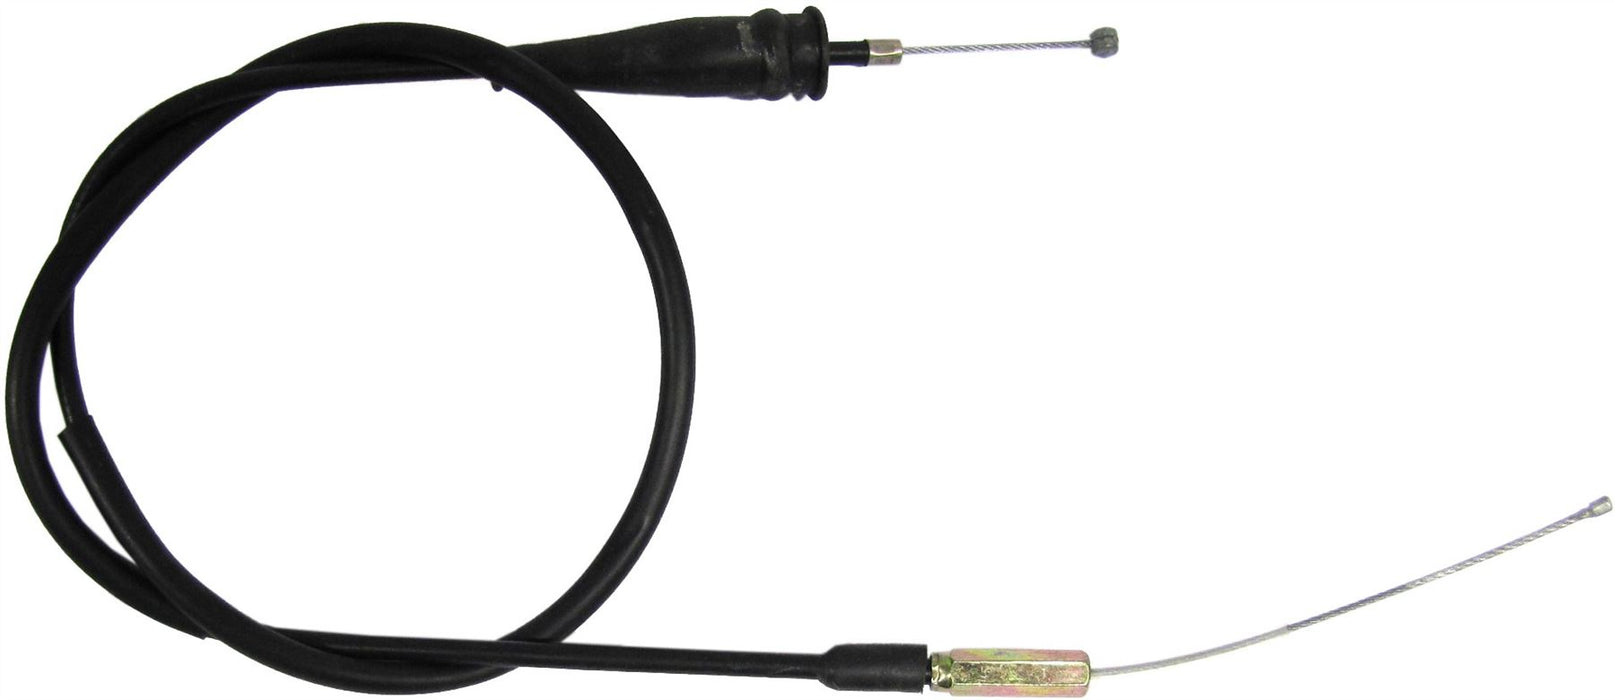 Throttle Cable Fits Yamaha WR 250 1991-2003